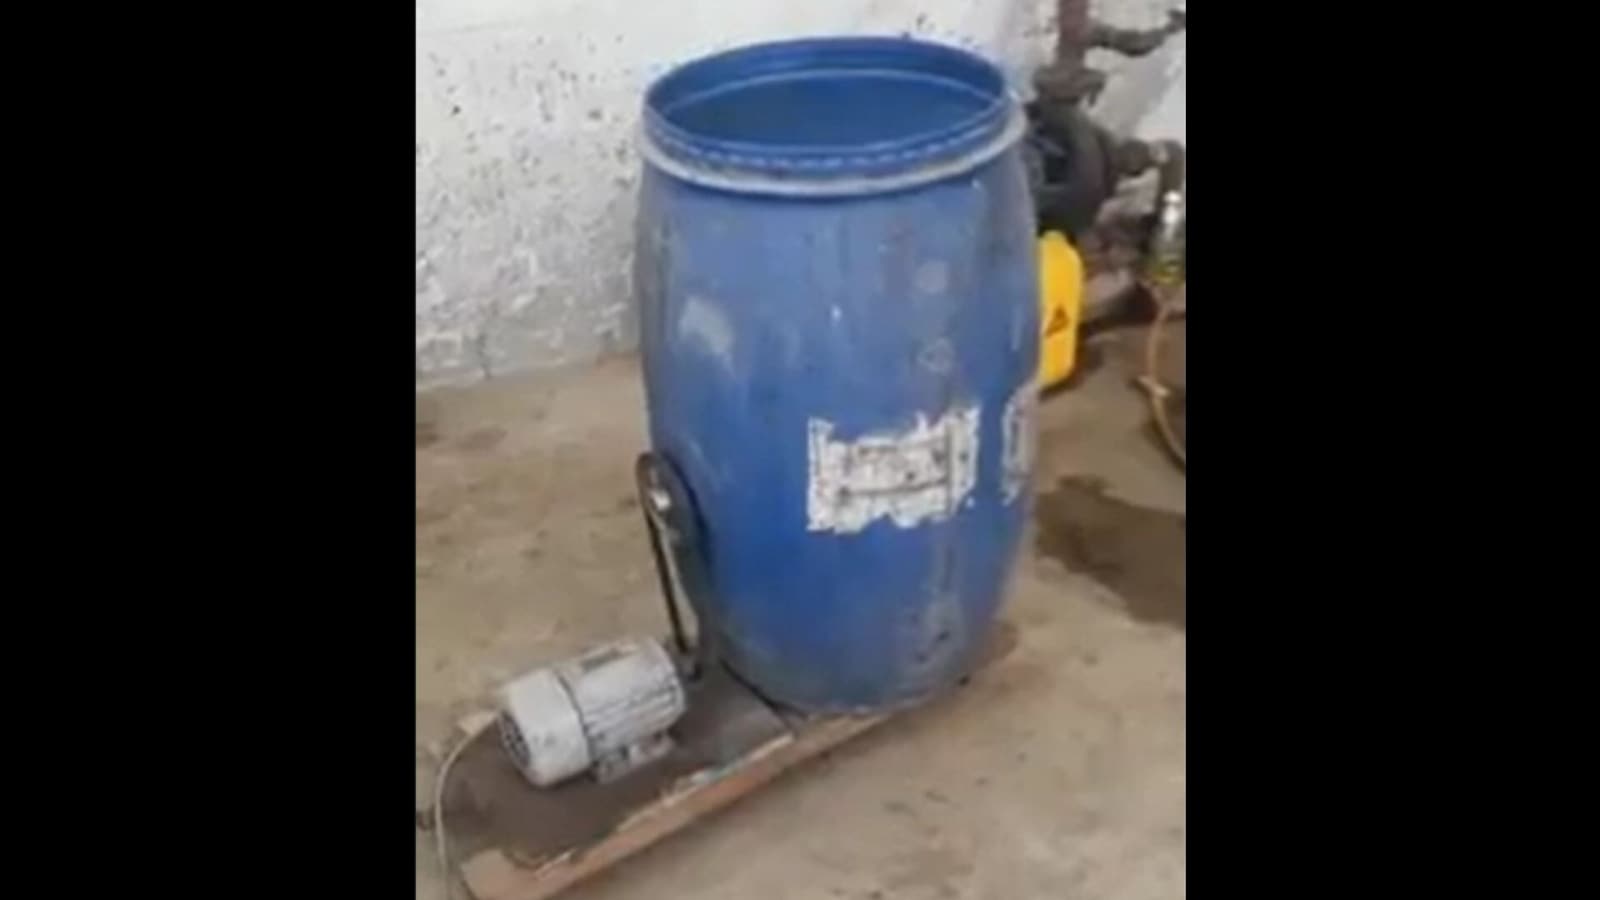 Man’s jugaad washing machine is a hit on the Internet. Watch